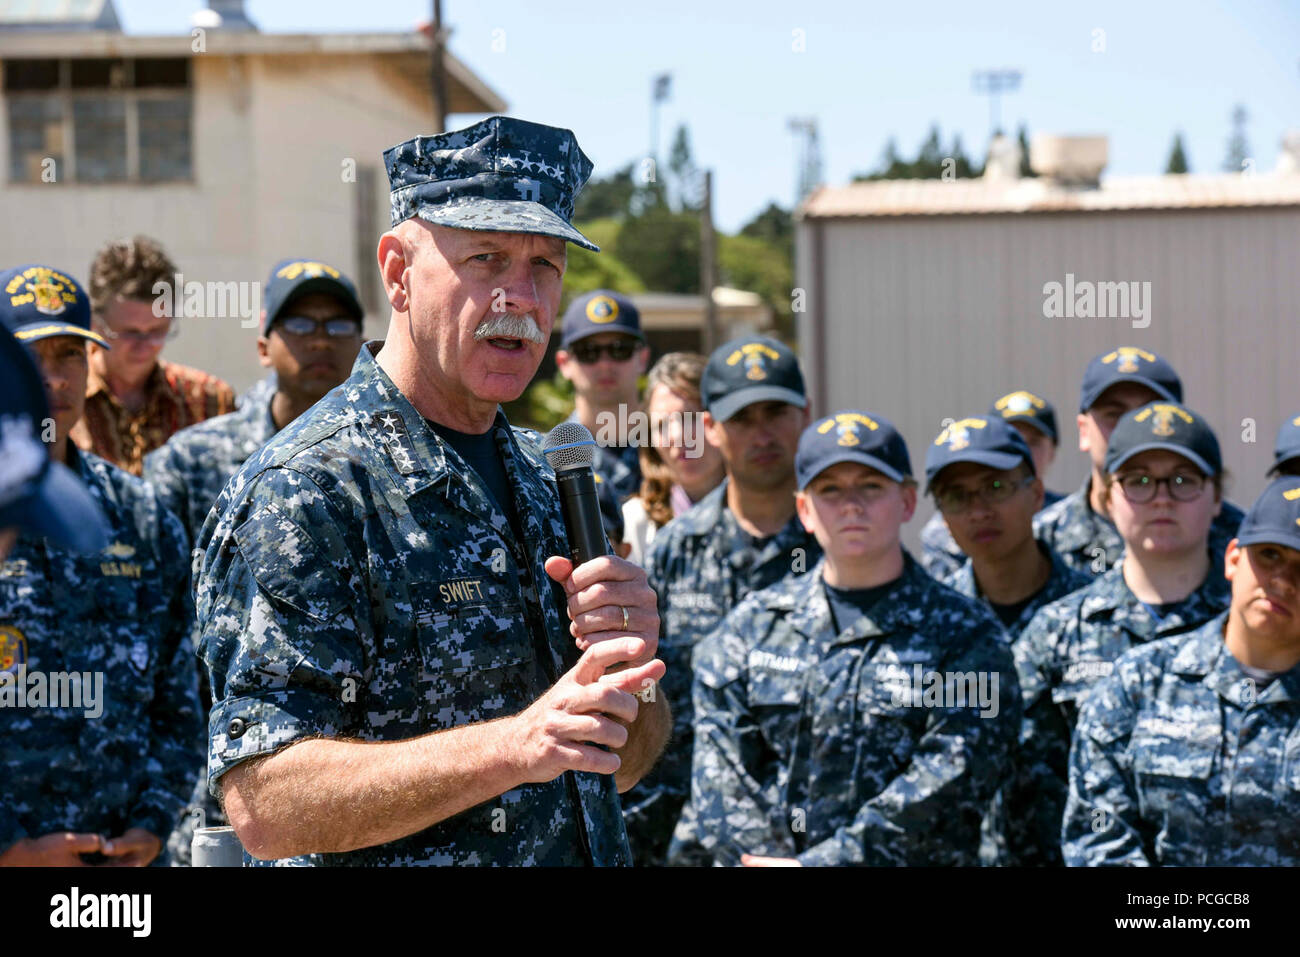 PEARL HARBOR (April 26, 2016) Adm. Scott Swift, commander of U.S. Pacific Fleet, speaks to Sailors assigned to the Pacific Surface Action Group (SAG) during an all-hands call aboard USS Momsen (DDG 92). The Pacific SAG includes the guided-missile destroyers USS Decatur (DDG 73), USS Spruance (DDG 111), and Momsen, and is deploying to the Western Pacific. The U.S. 3rd Fleet commander will retain operational control of the SAG throughout the deployment, including in waters west of the international date line. Stock Photo